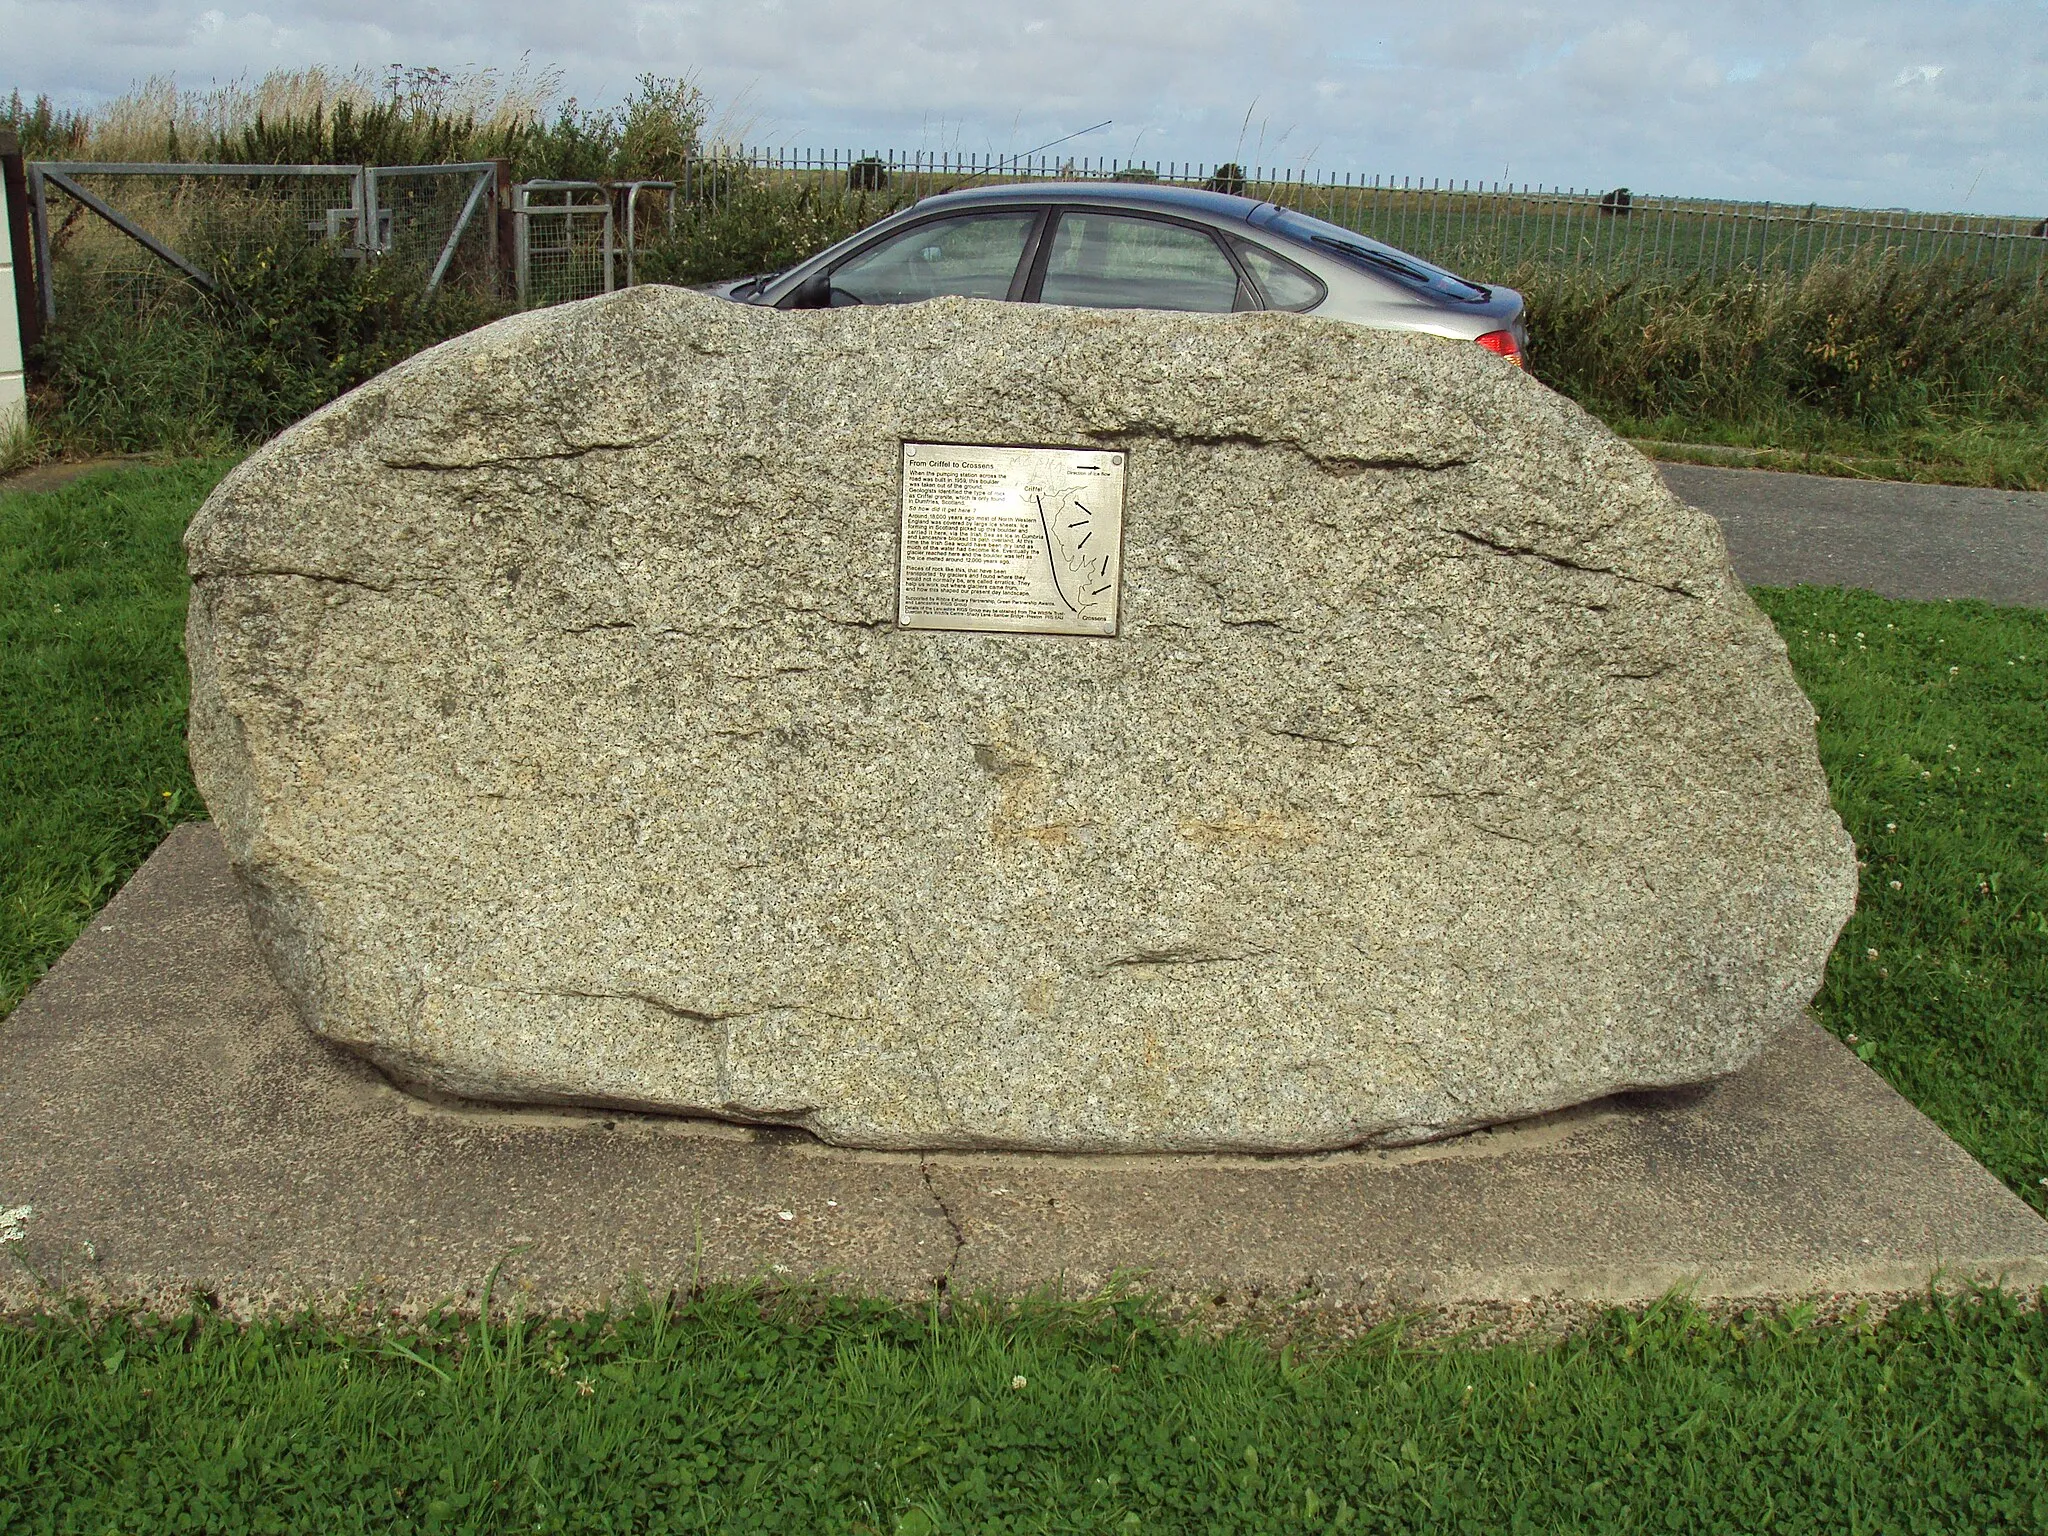 Photo showing: Granite block which made its way from Criffel, Scotland to Crossens, England during a previous ice age. On Banks Road between Crossens, Merseyside and Banks, Lancashire, England.